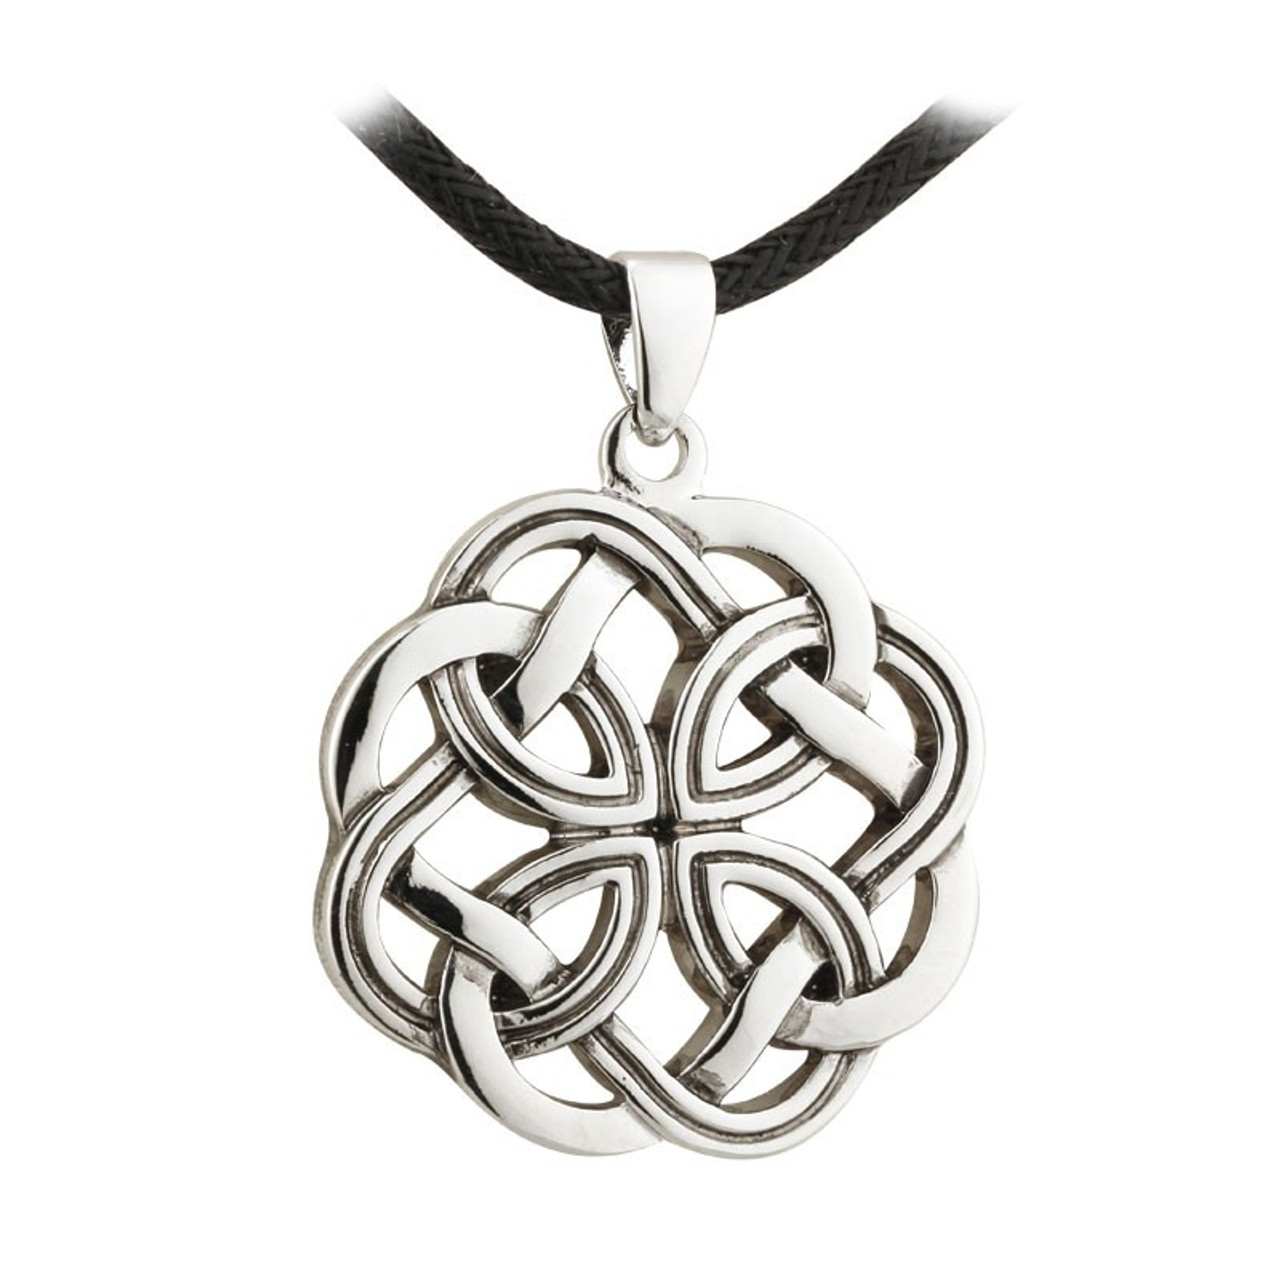 Simple Celtic Knot Pendant Necklace on Cord or Chain, Dara Knot Jewelry  Gift, Adjustable Rope Choker or 16 18 20 22 24 30 Inch Stainless - Etsy  Norway